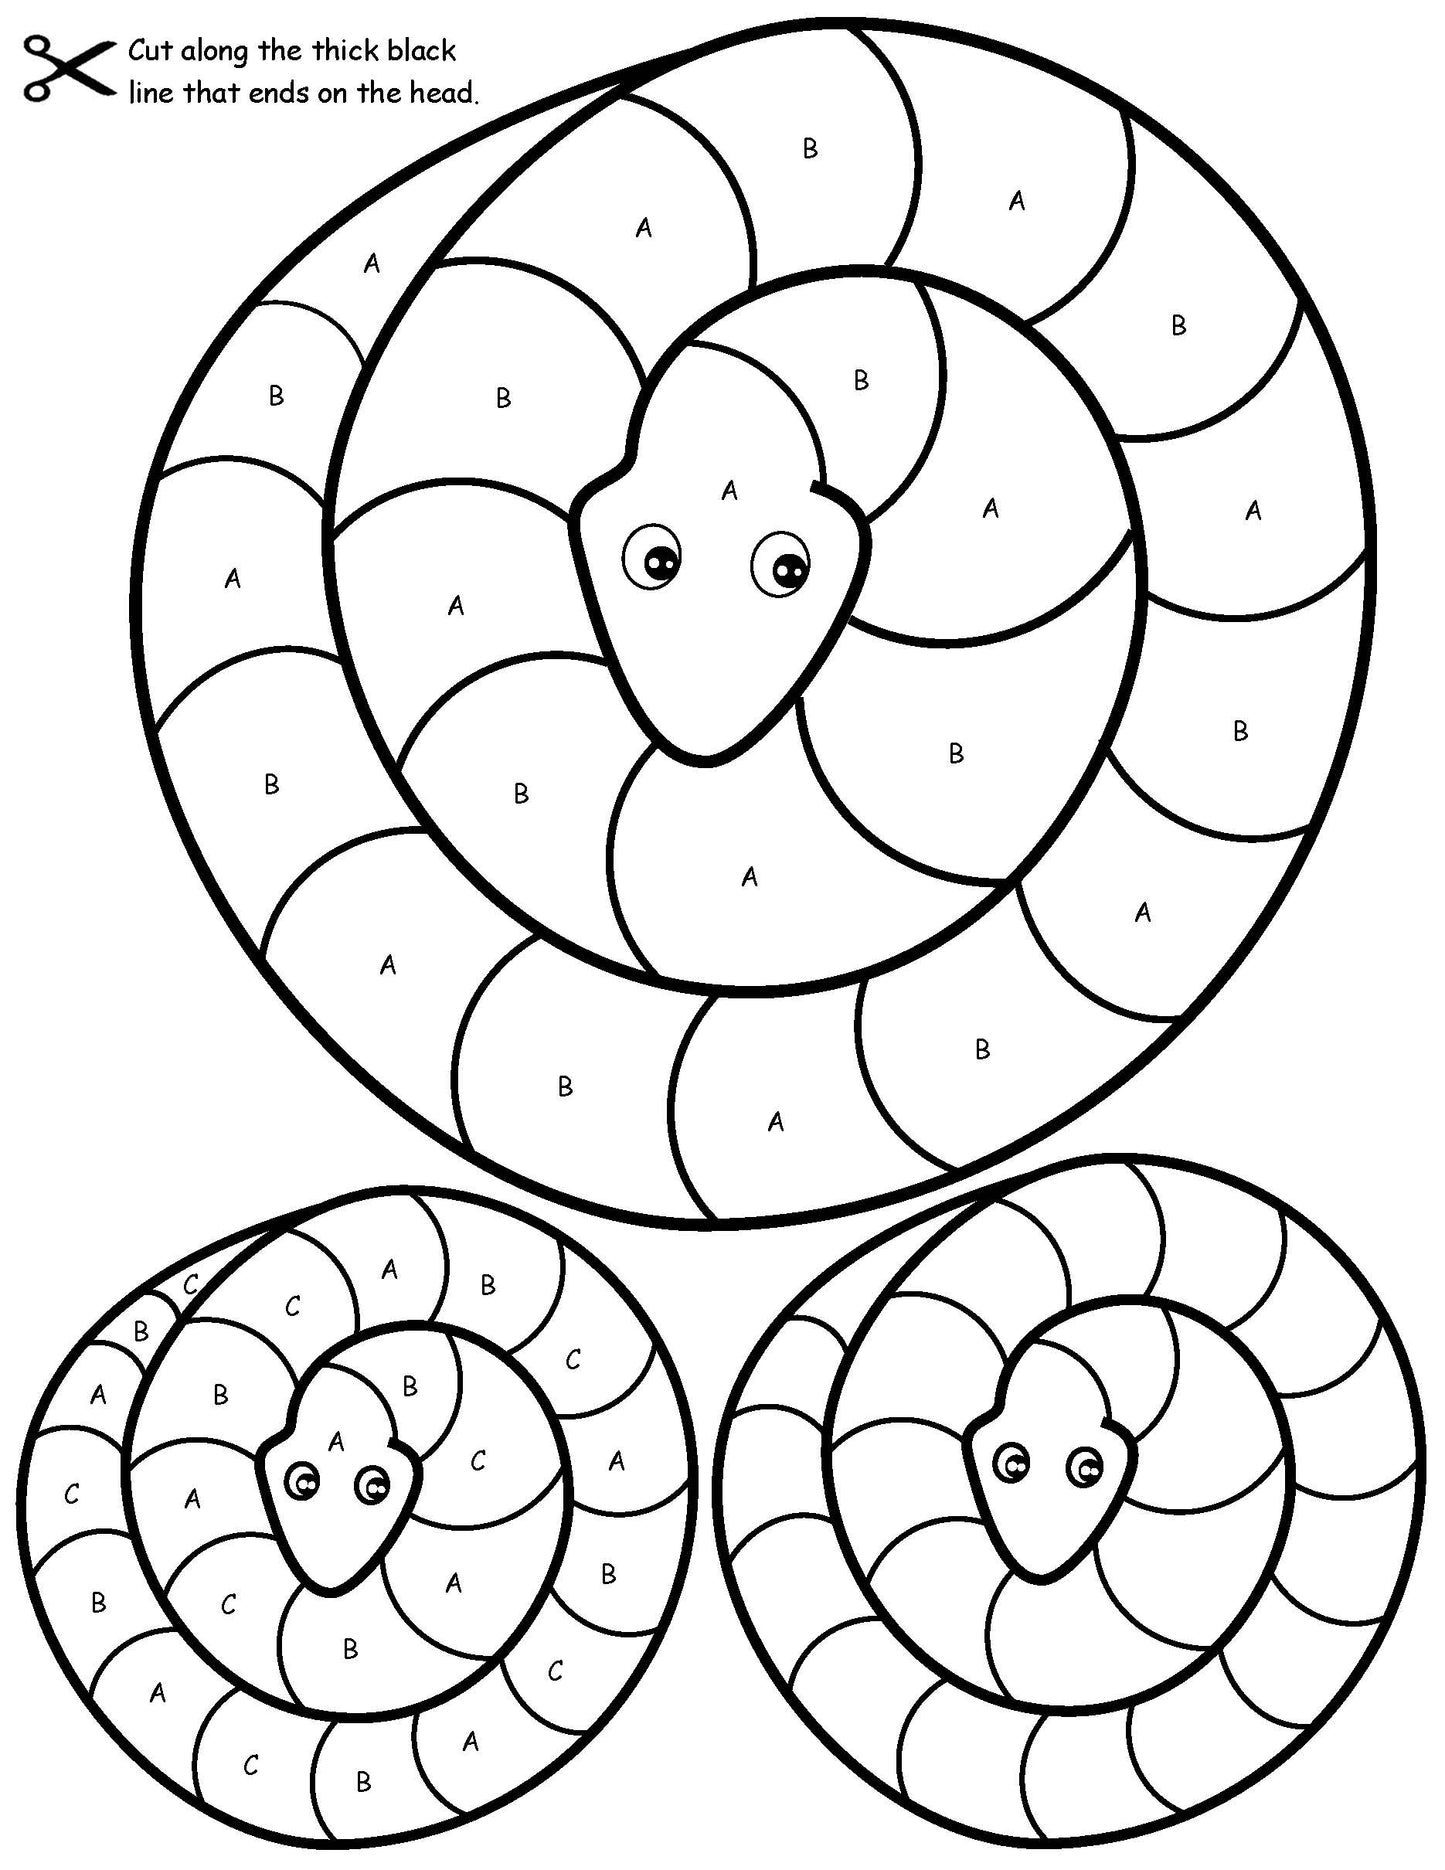 Pattern Snakes Math and Art Activity